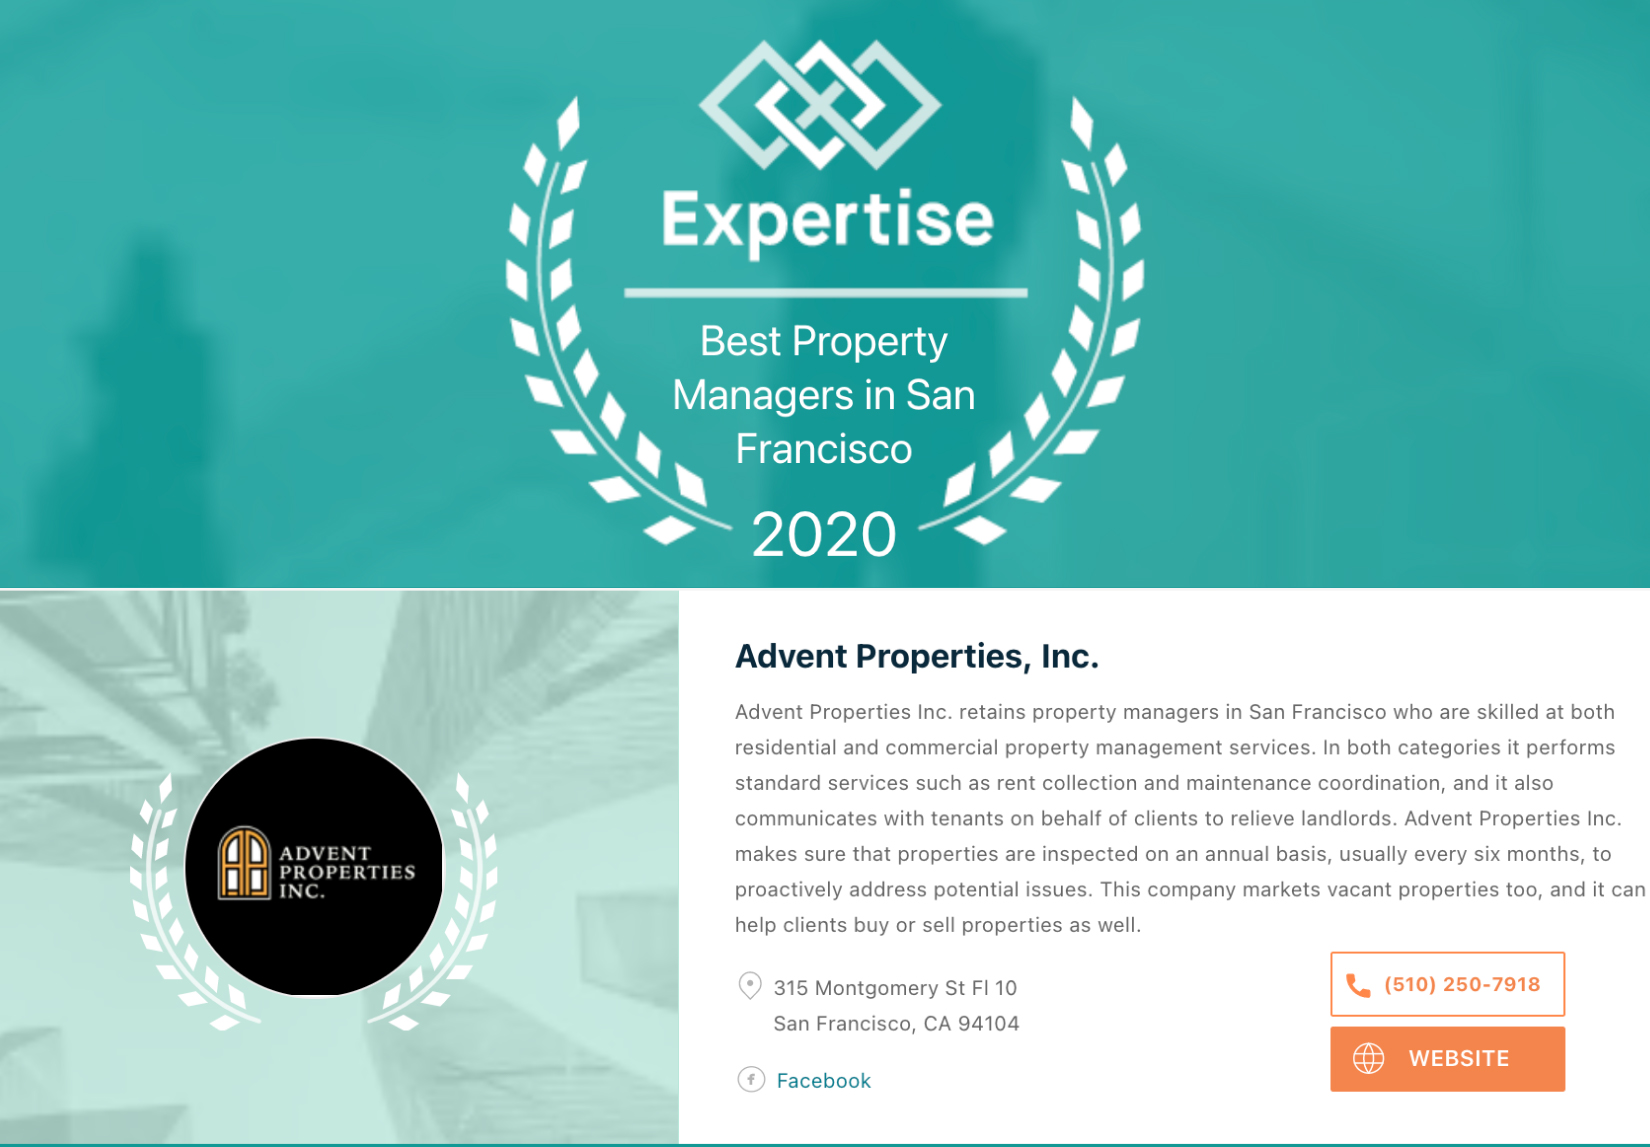 Expertise.com's 2020 Best Property Managers in San Francisco